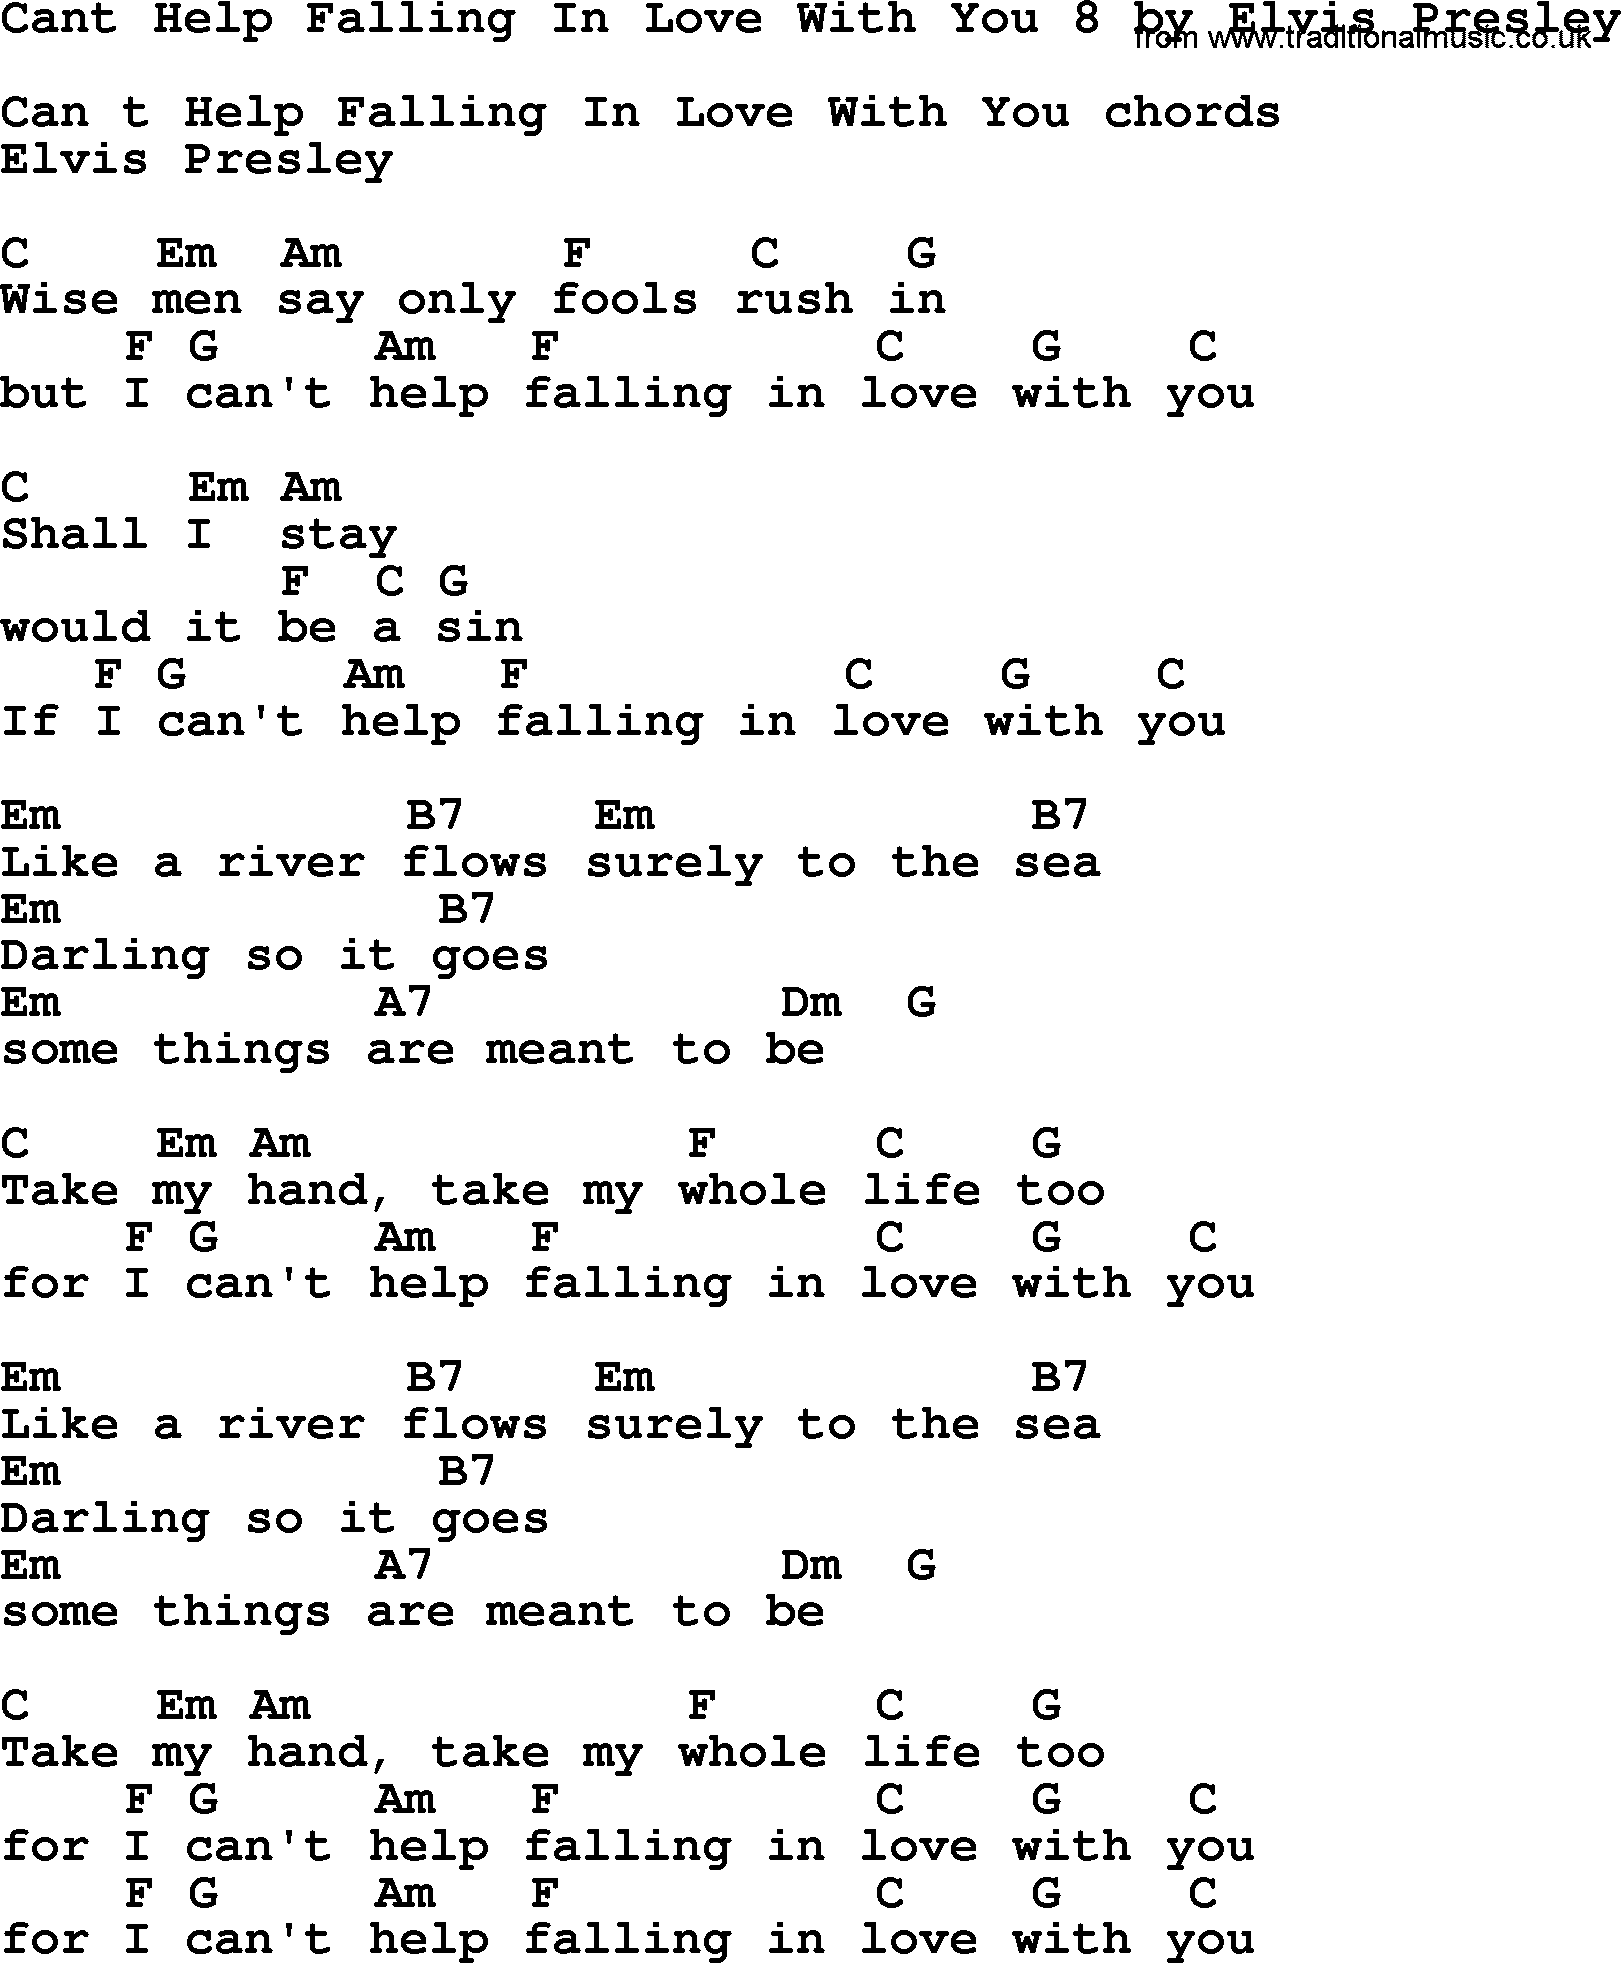 Cant Help Falling In Love With You 8, by Elvis - lyrics and chords